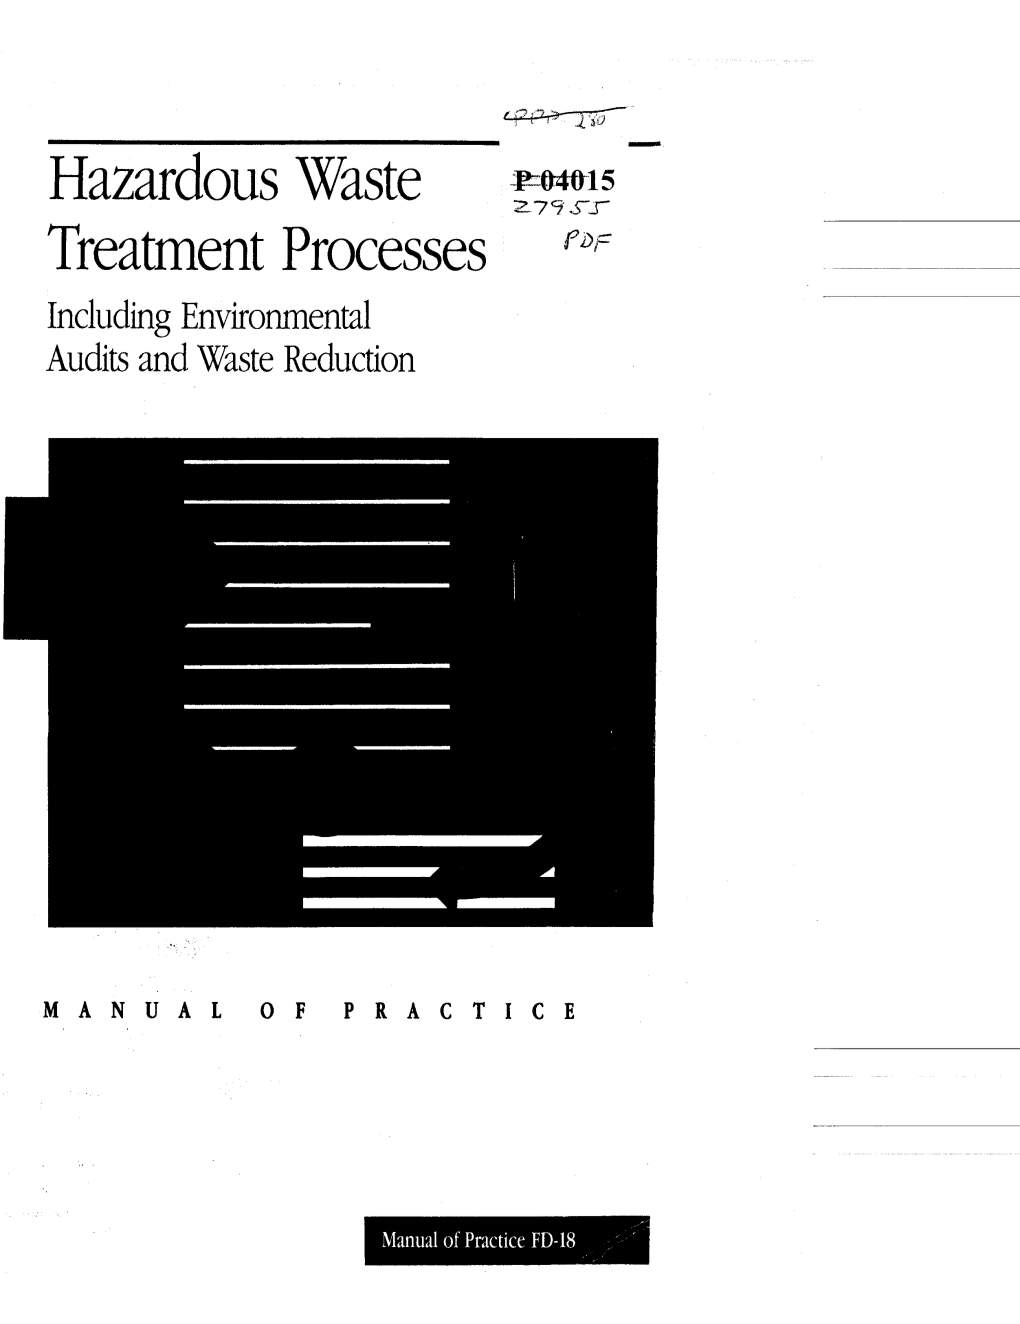 Hazardous Waste Treatment Processes Including Environmental Audits and Waste Reduction Manual of Practice FD-18